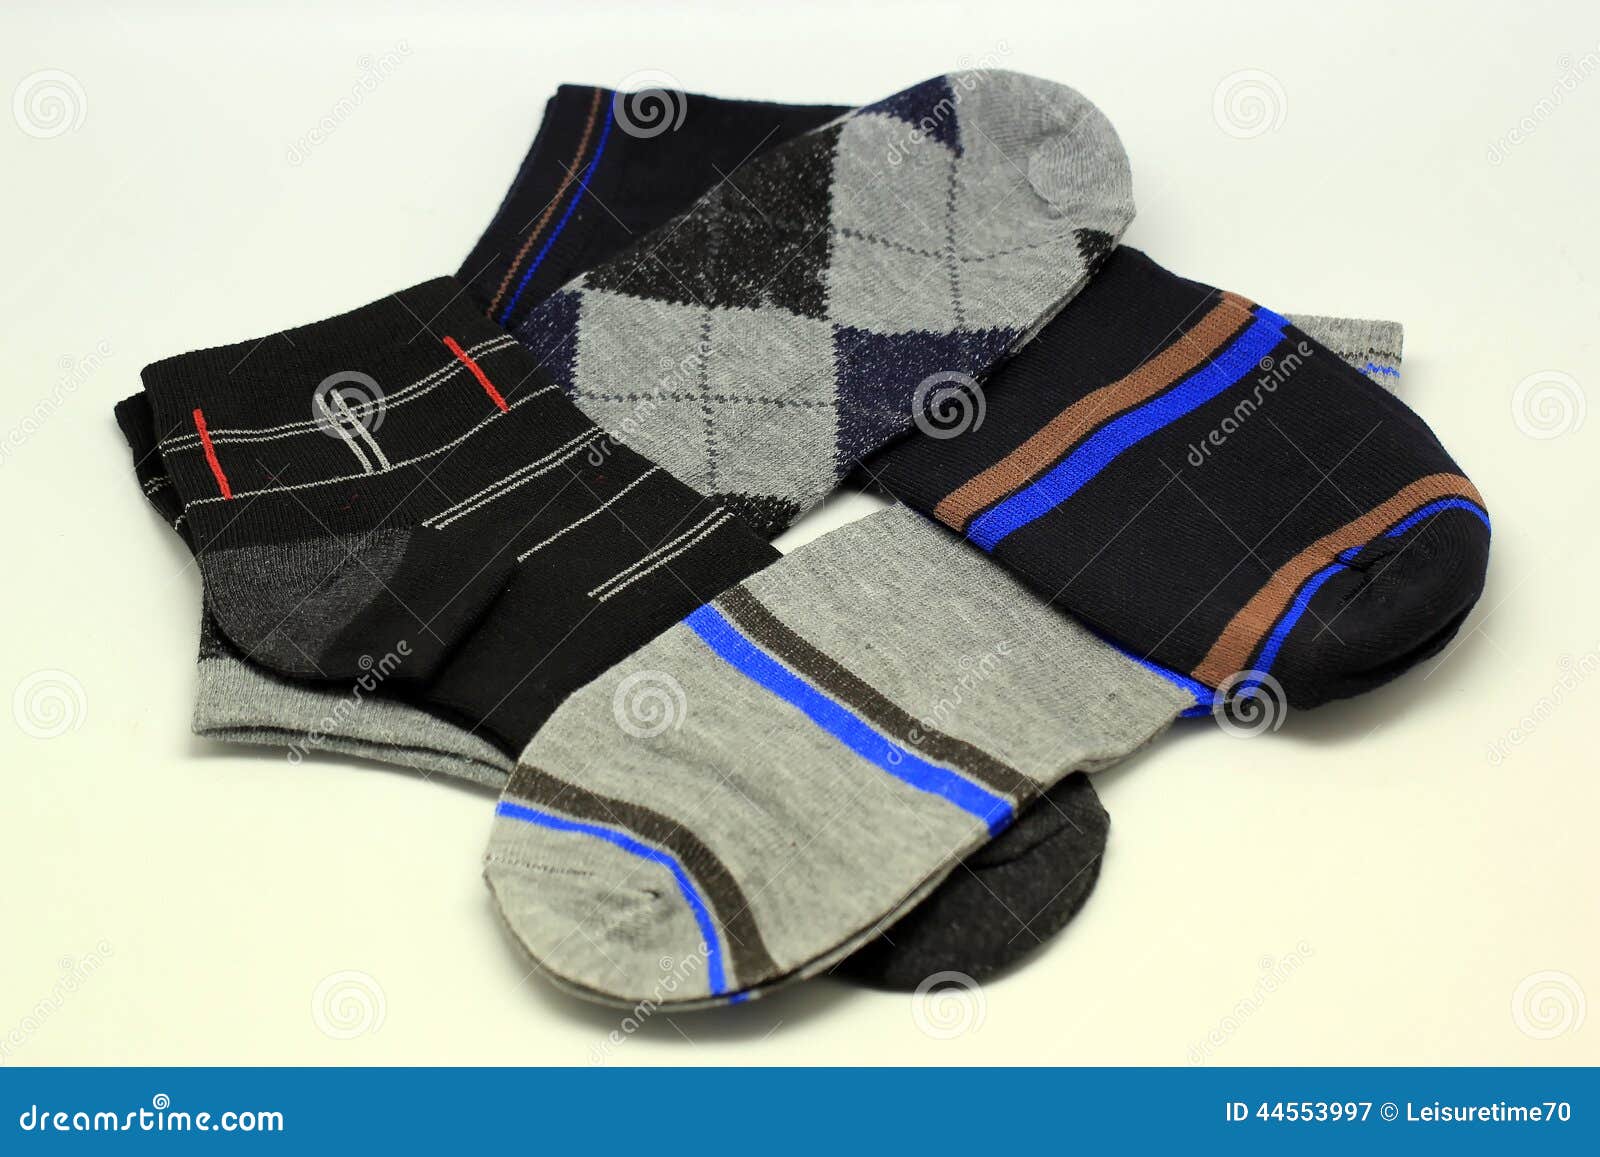 Socks stock image. Image of cloth, pair, casual, striped - 44553997